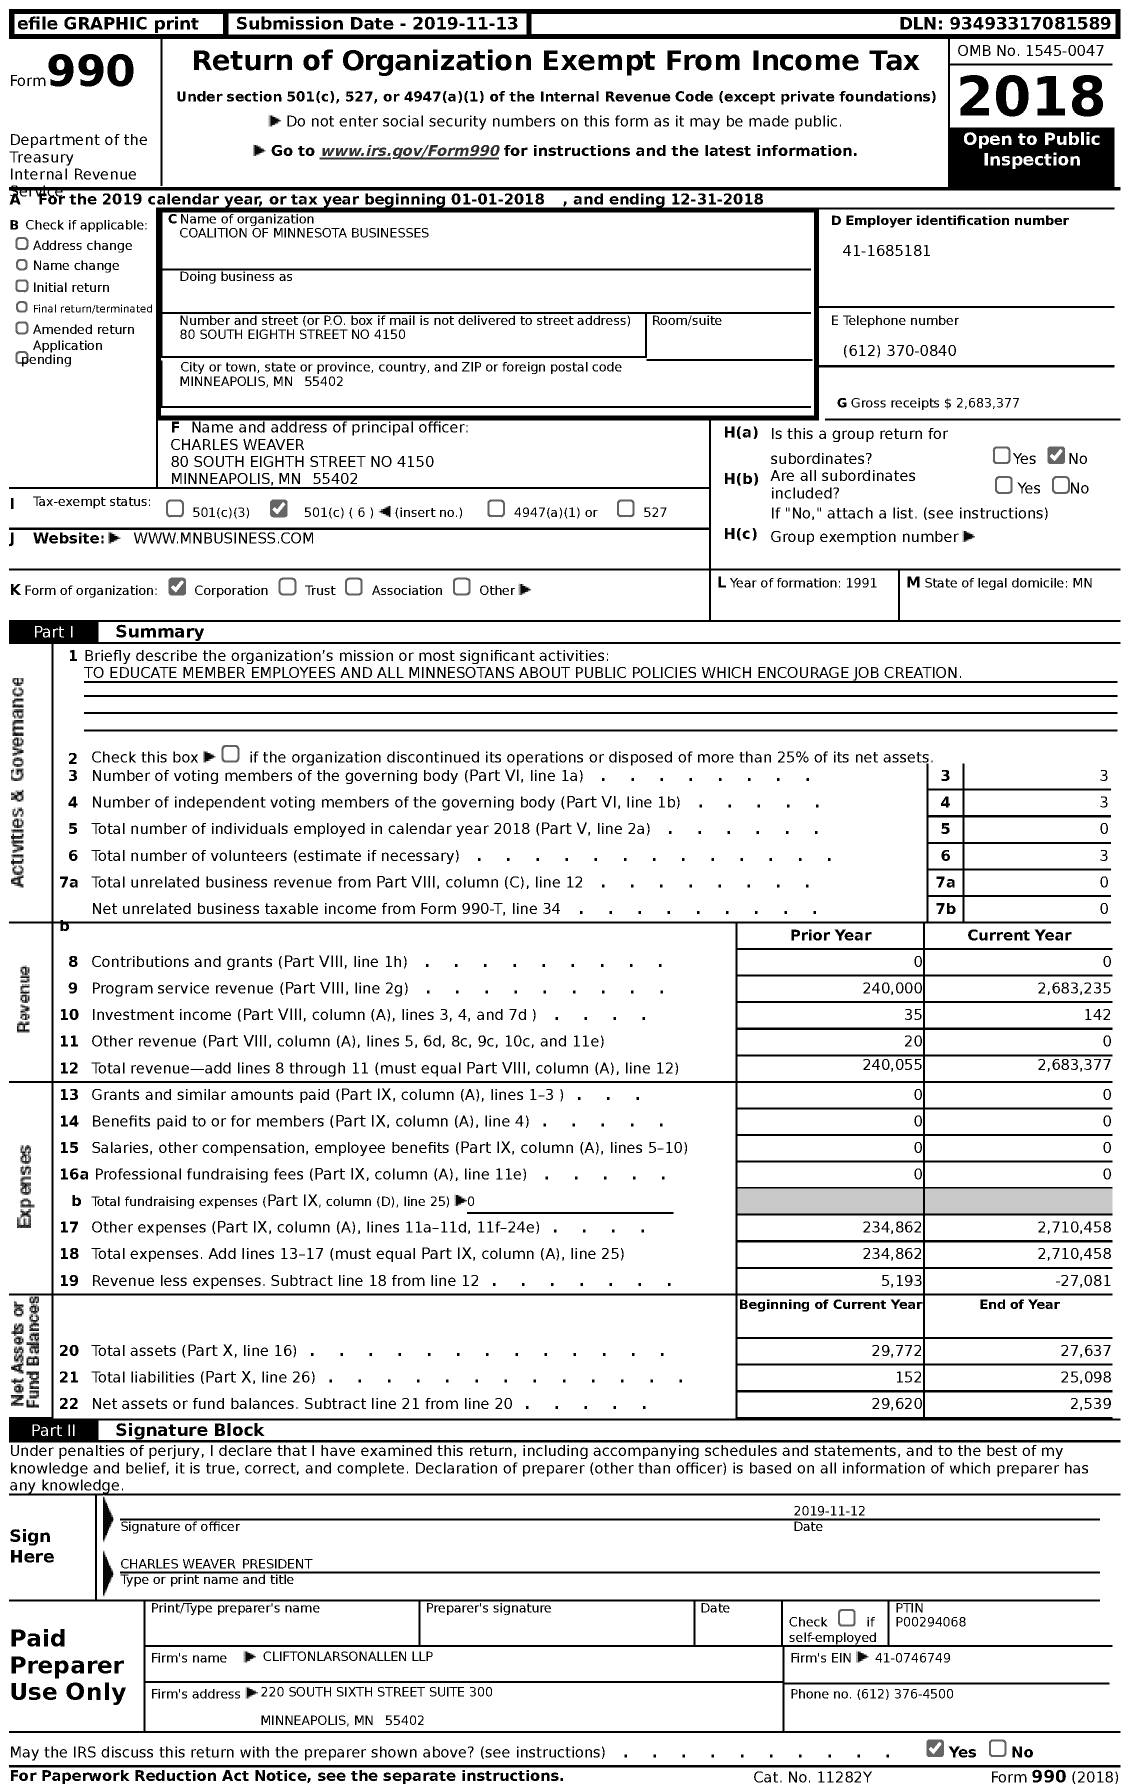 Image of first page of 2018 Form 990 for Coalition of Minnesota Businesses (CMB)